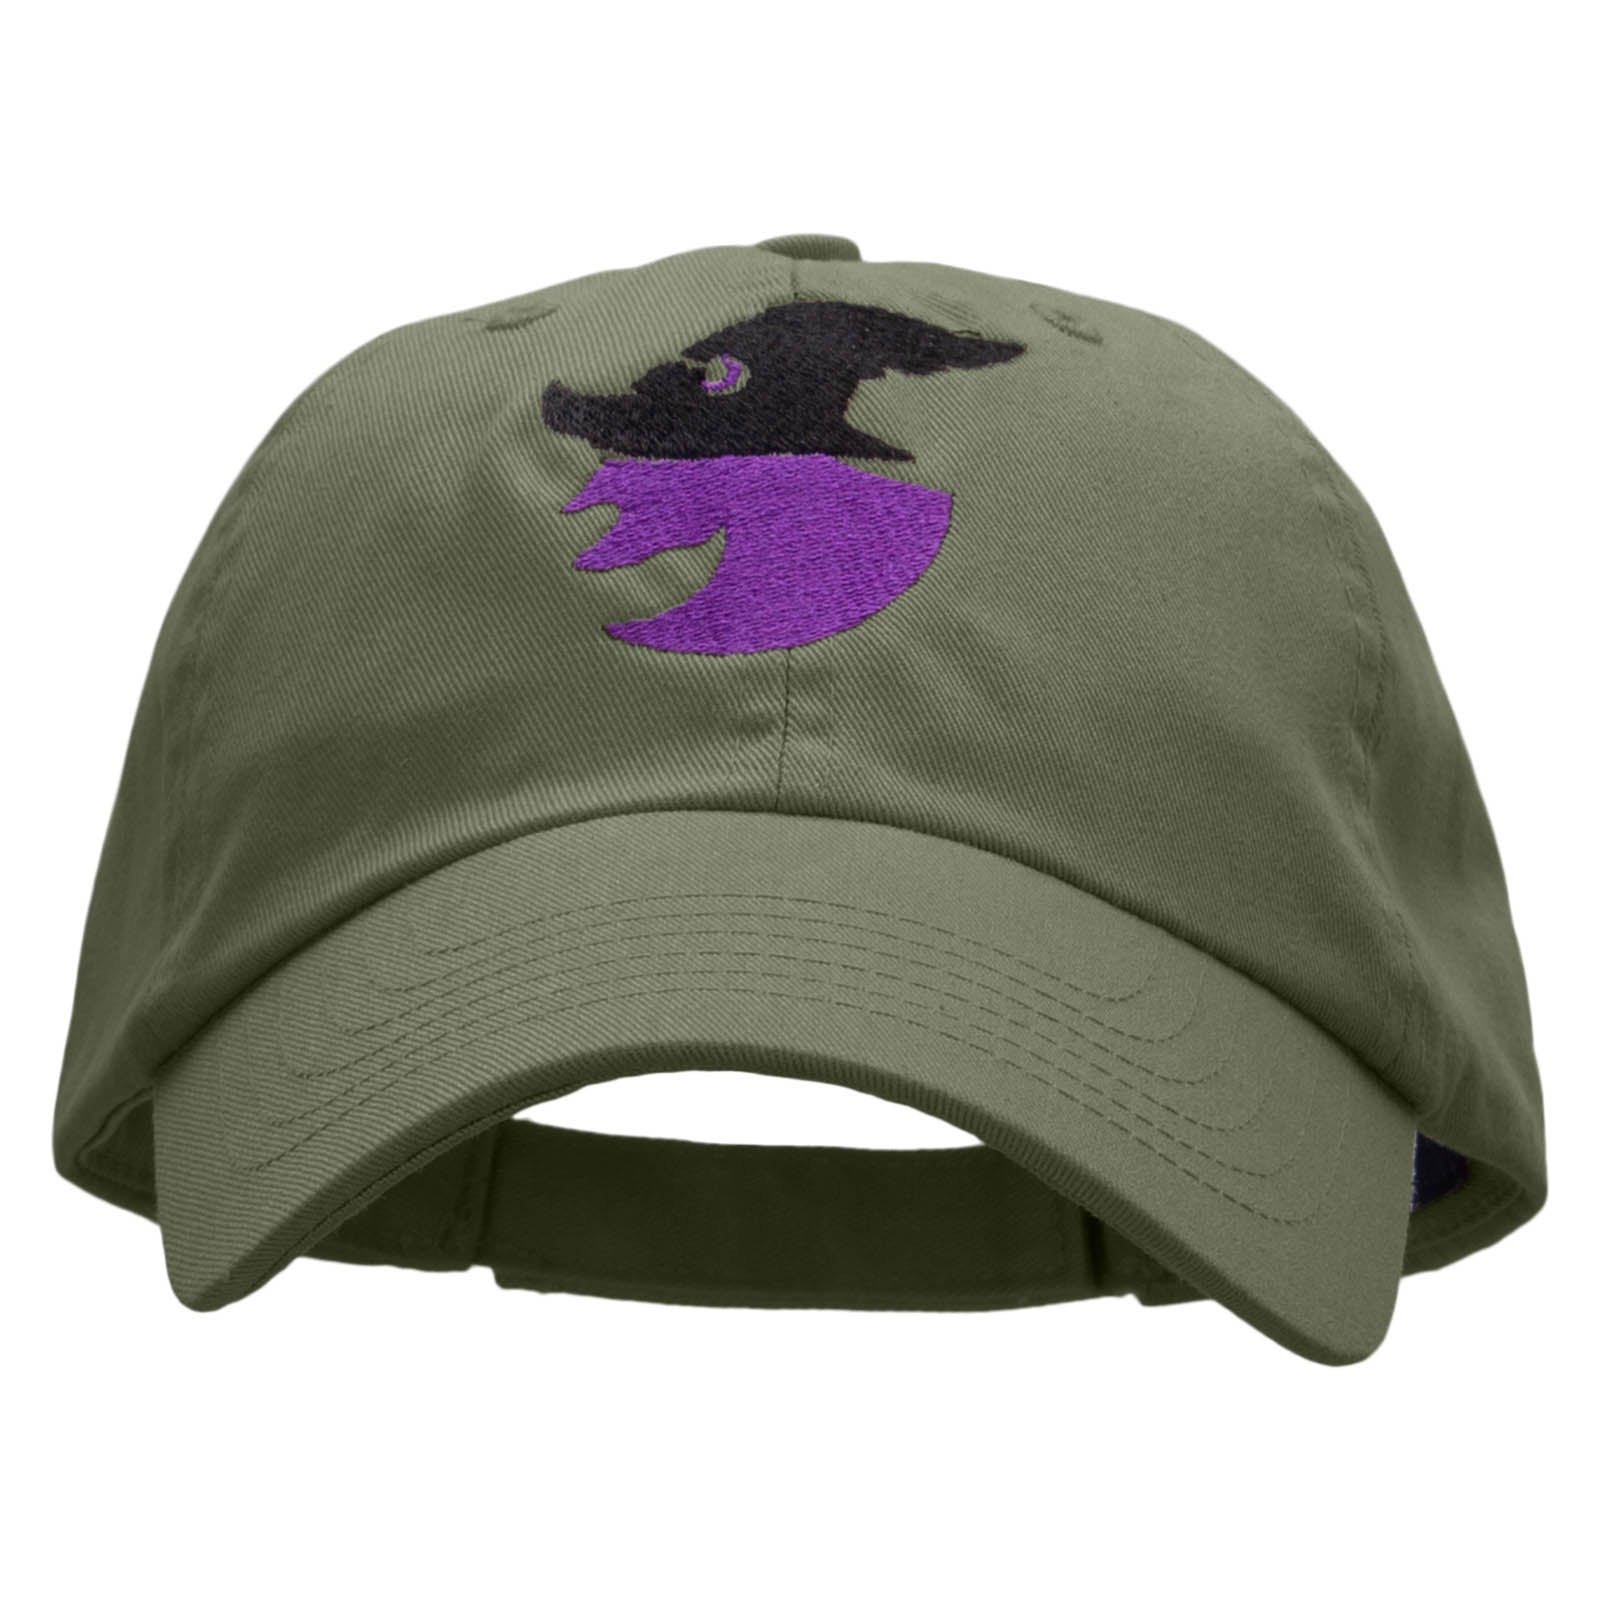 Witch Silhouette Low Profile Pet Spun Washed Cap - Olive OSFM